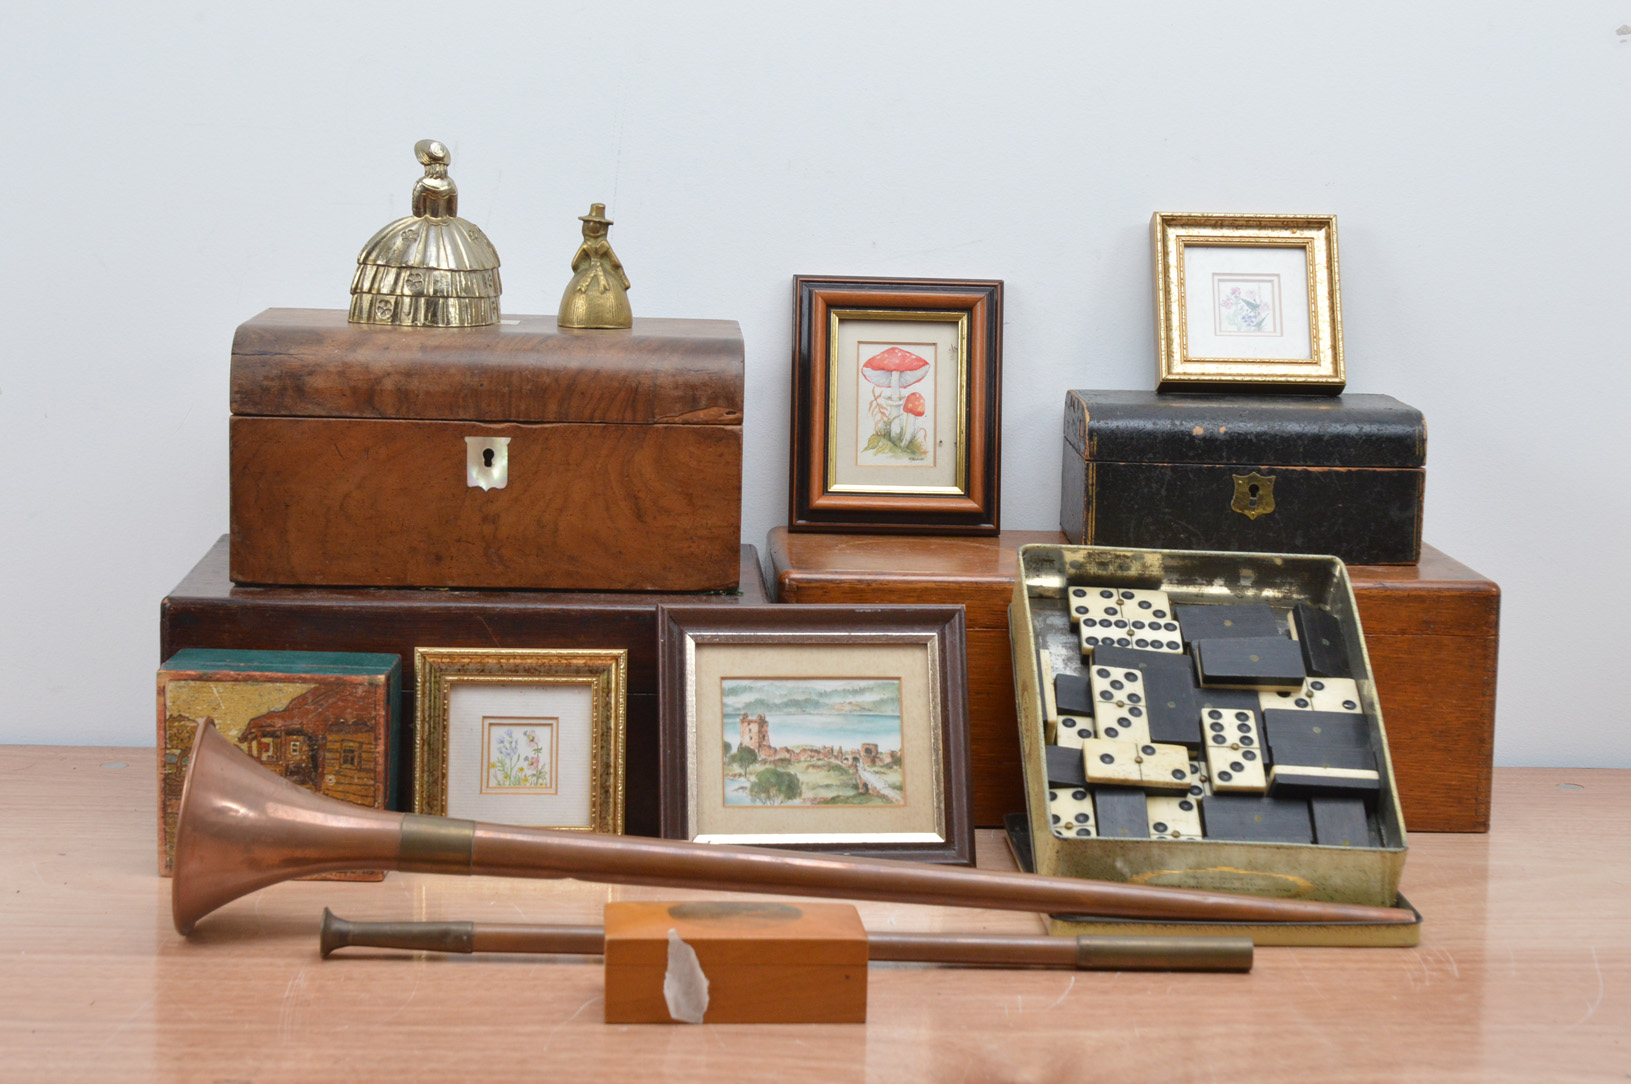 A collection of works of art, including bone dominoes, three wooden boxes, a Jewellery box, brass